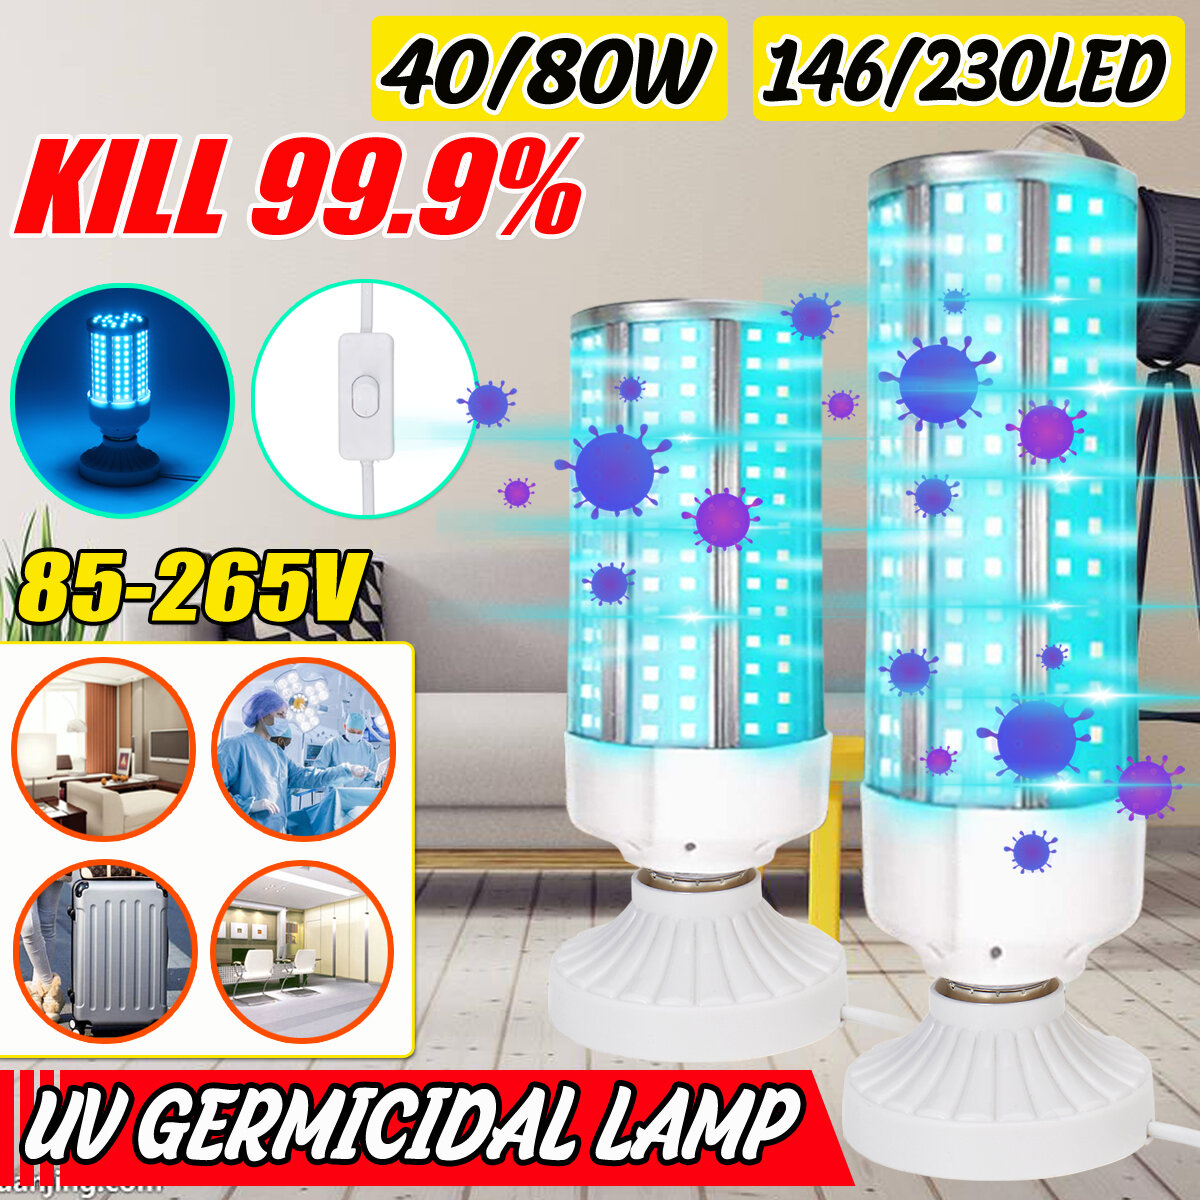 40W 80W UV Germicidal Lamp UVC E27 LED Bulb Household Ozone Disinfection Light With 1.7M Lampholder 